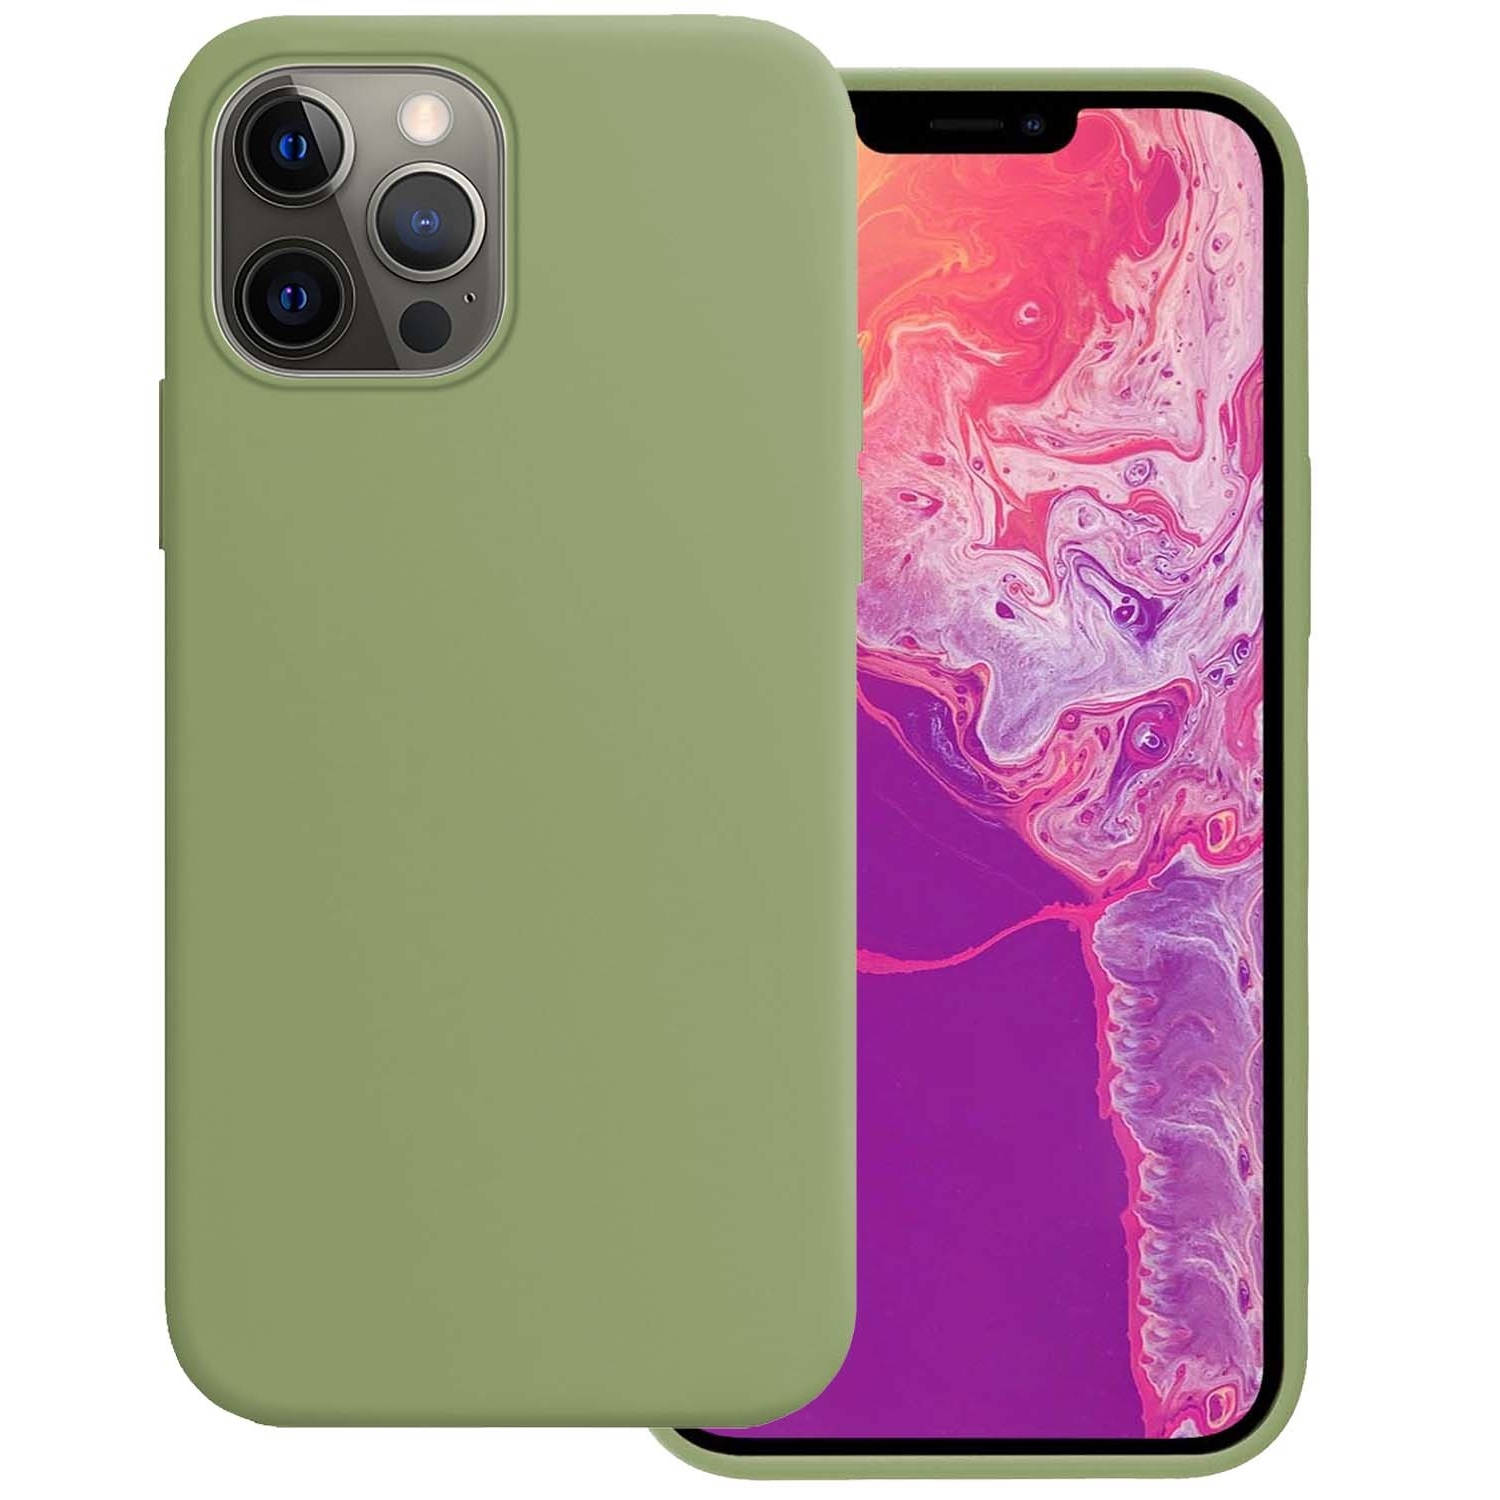 Basey Iphone 14 Pro Hoesje Siliconen Hoes Case Cover Iphone 14 Pro-groen